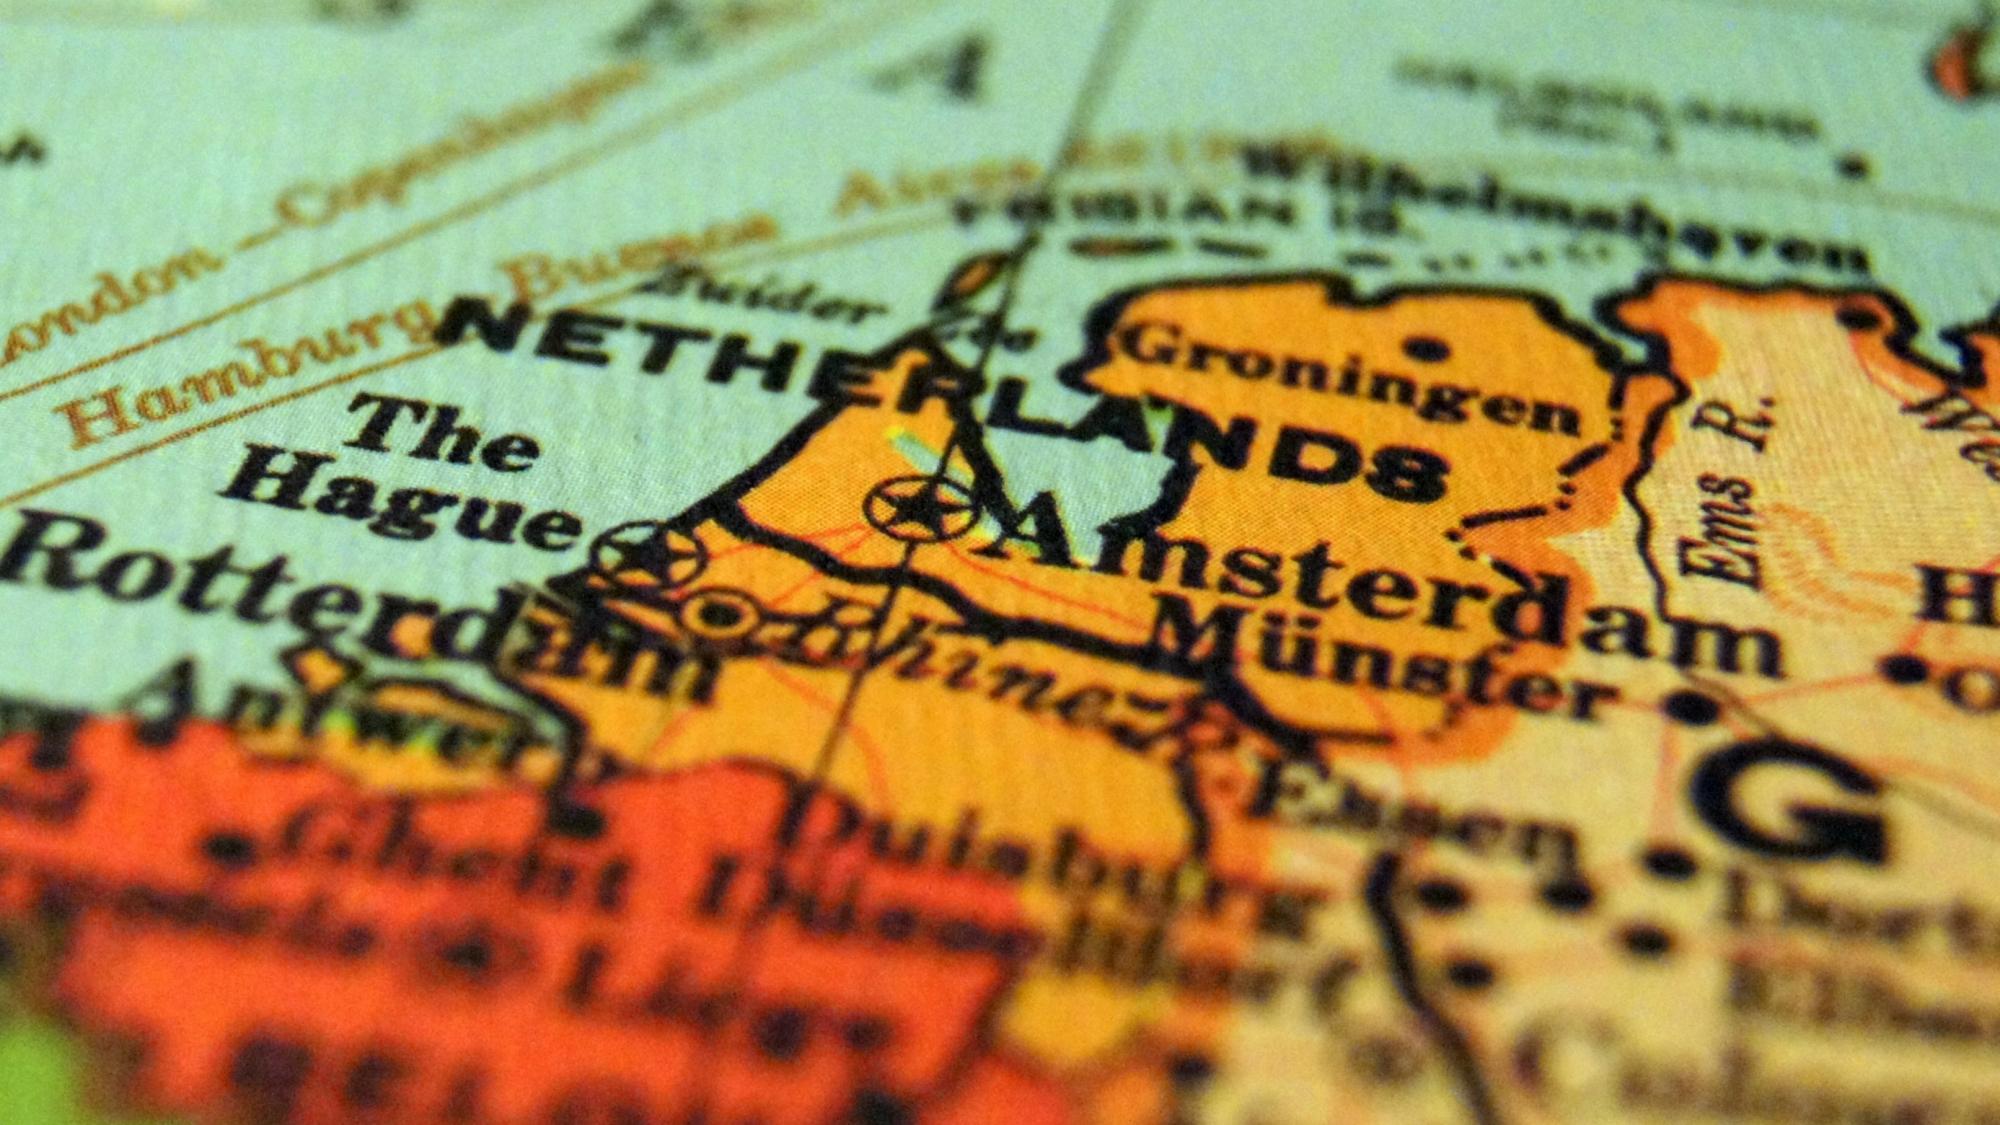 A map focused in on the Netherlands